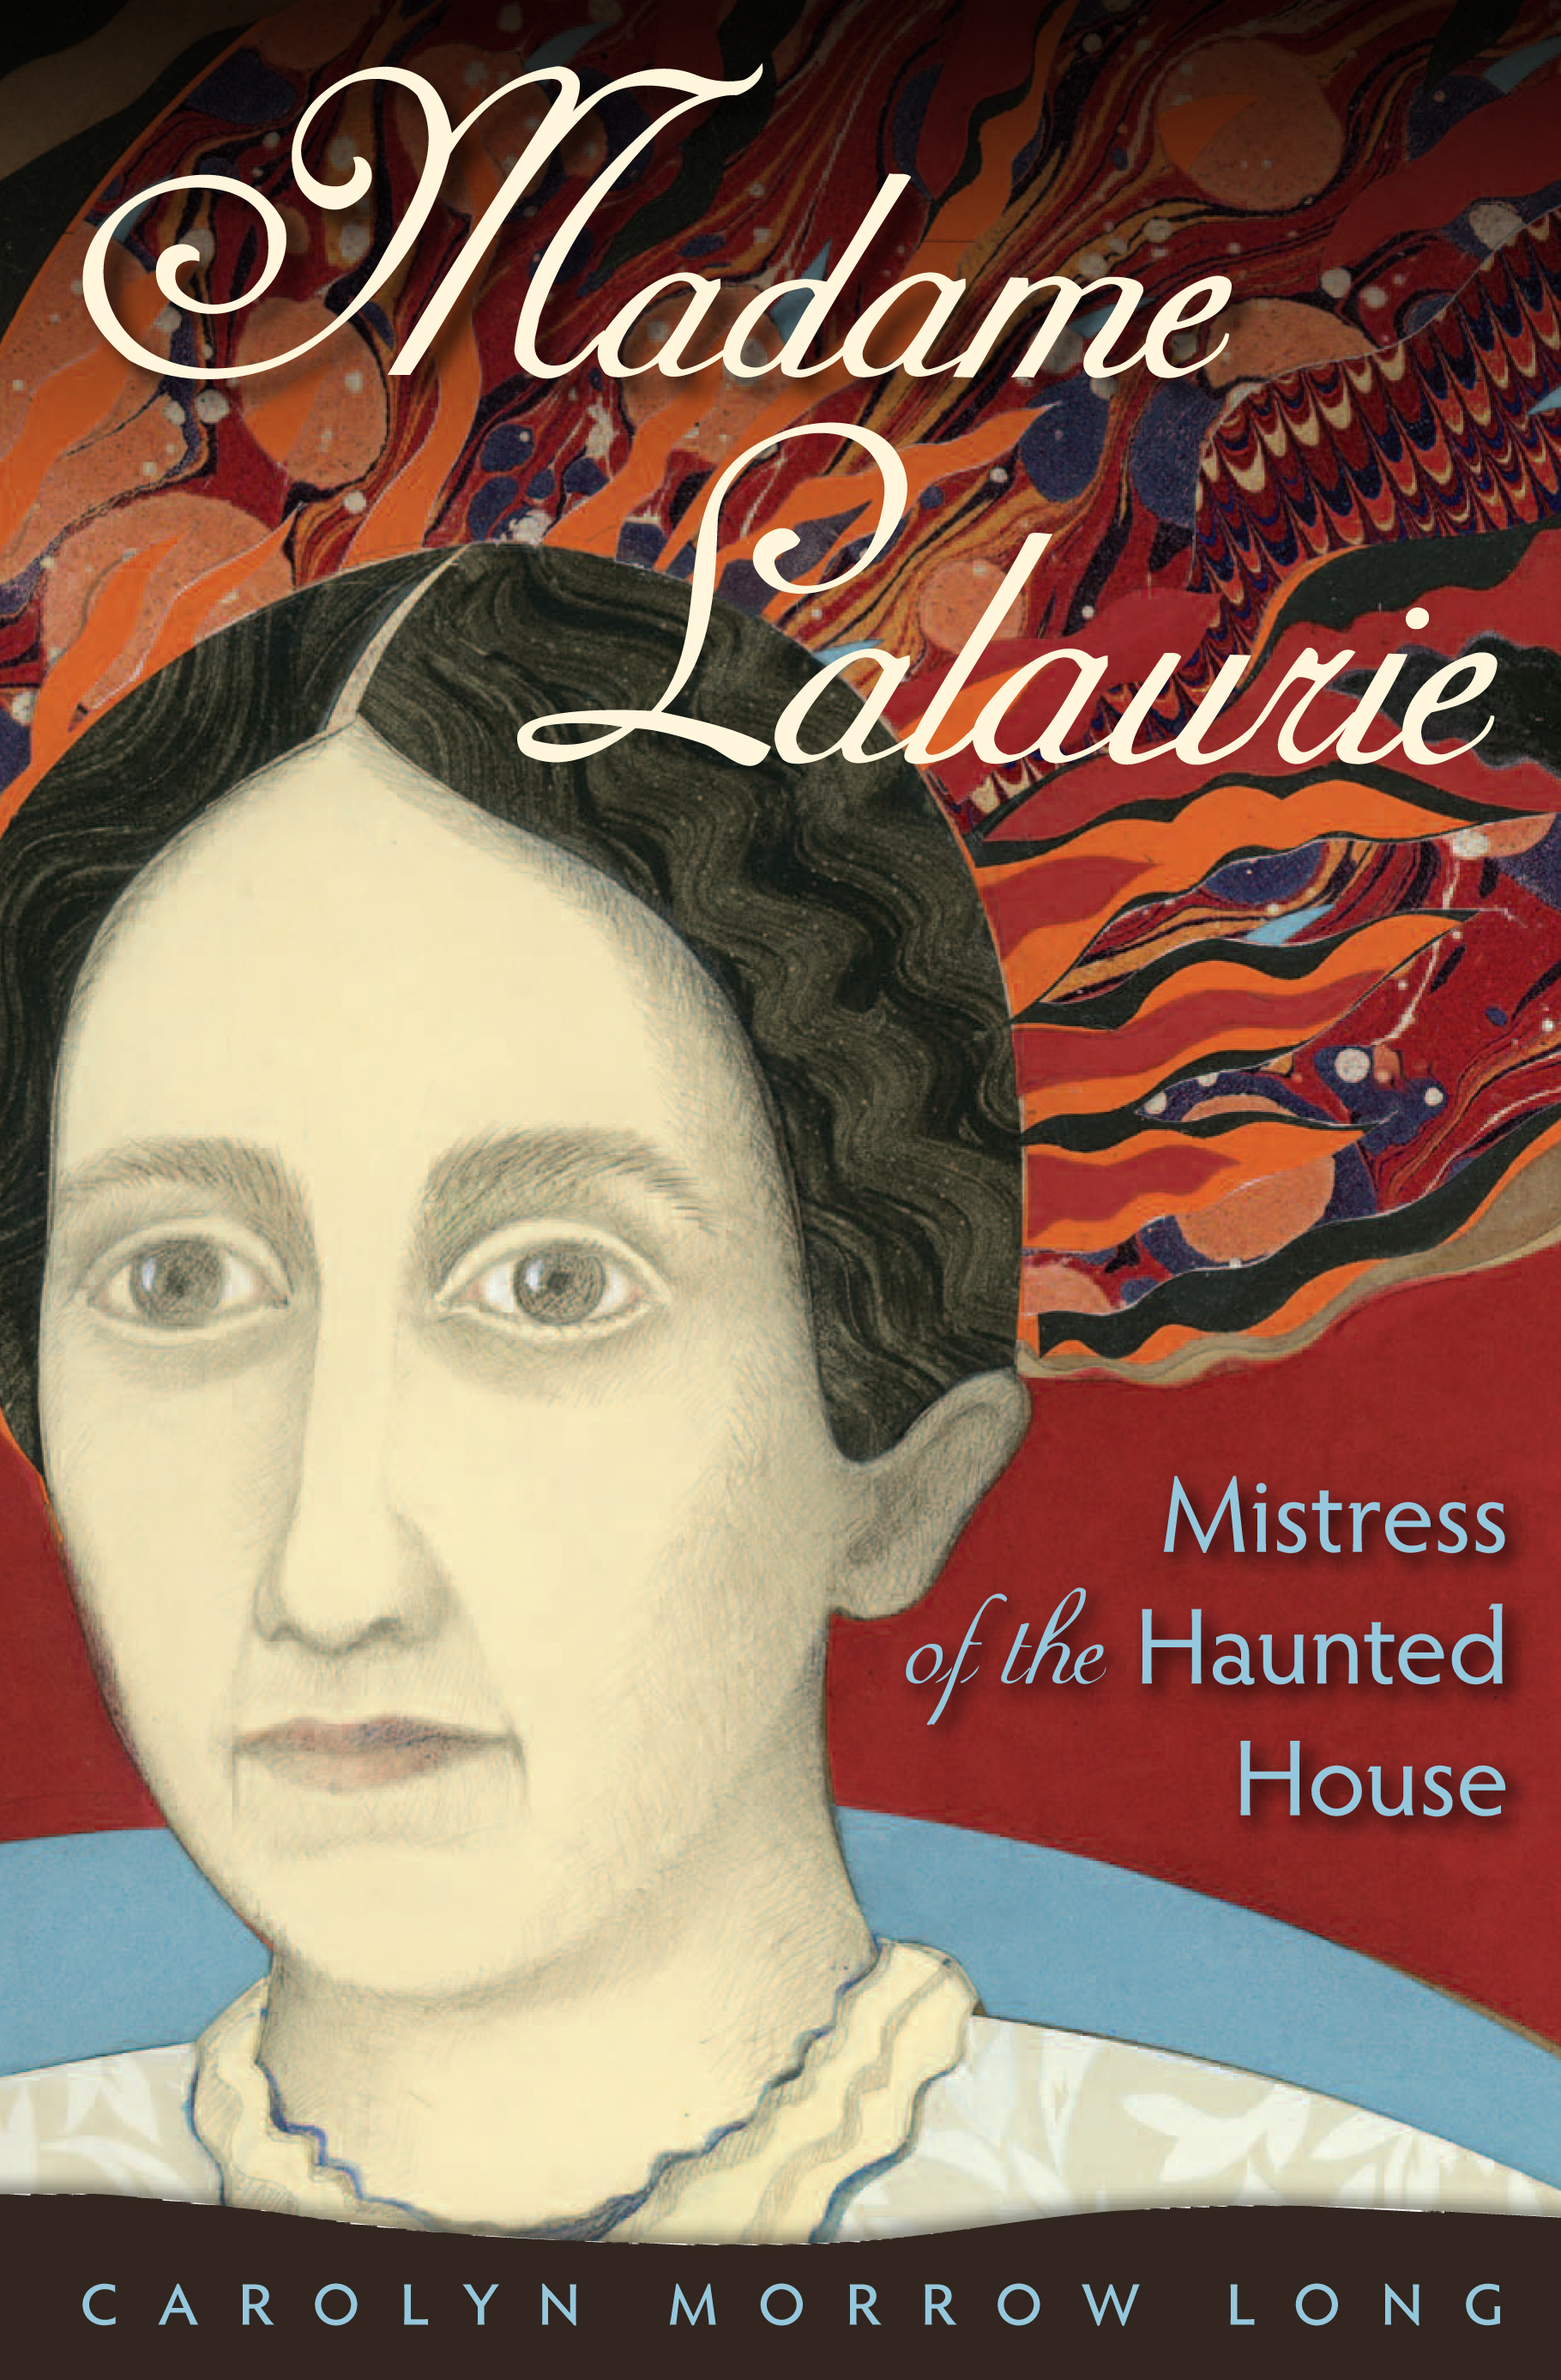 Madame-Lalaurie-Mistress-of-the-Haunted-House